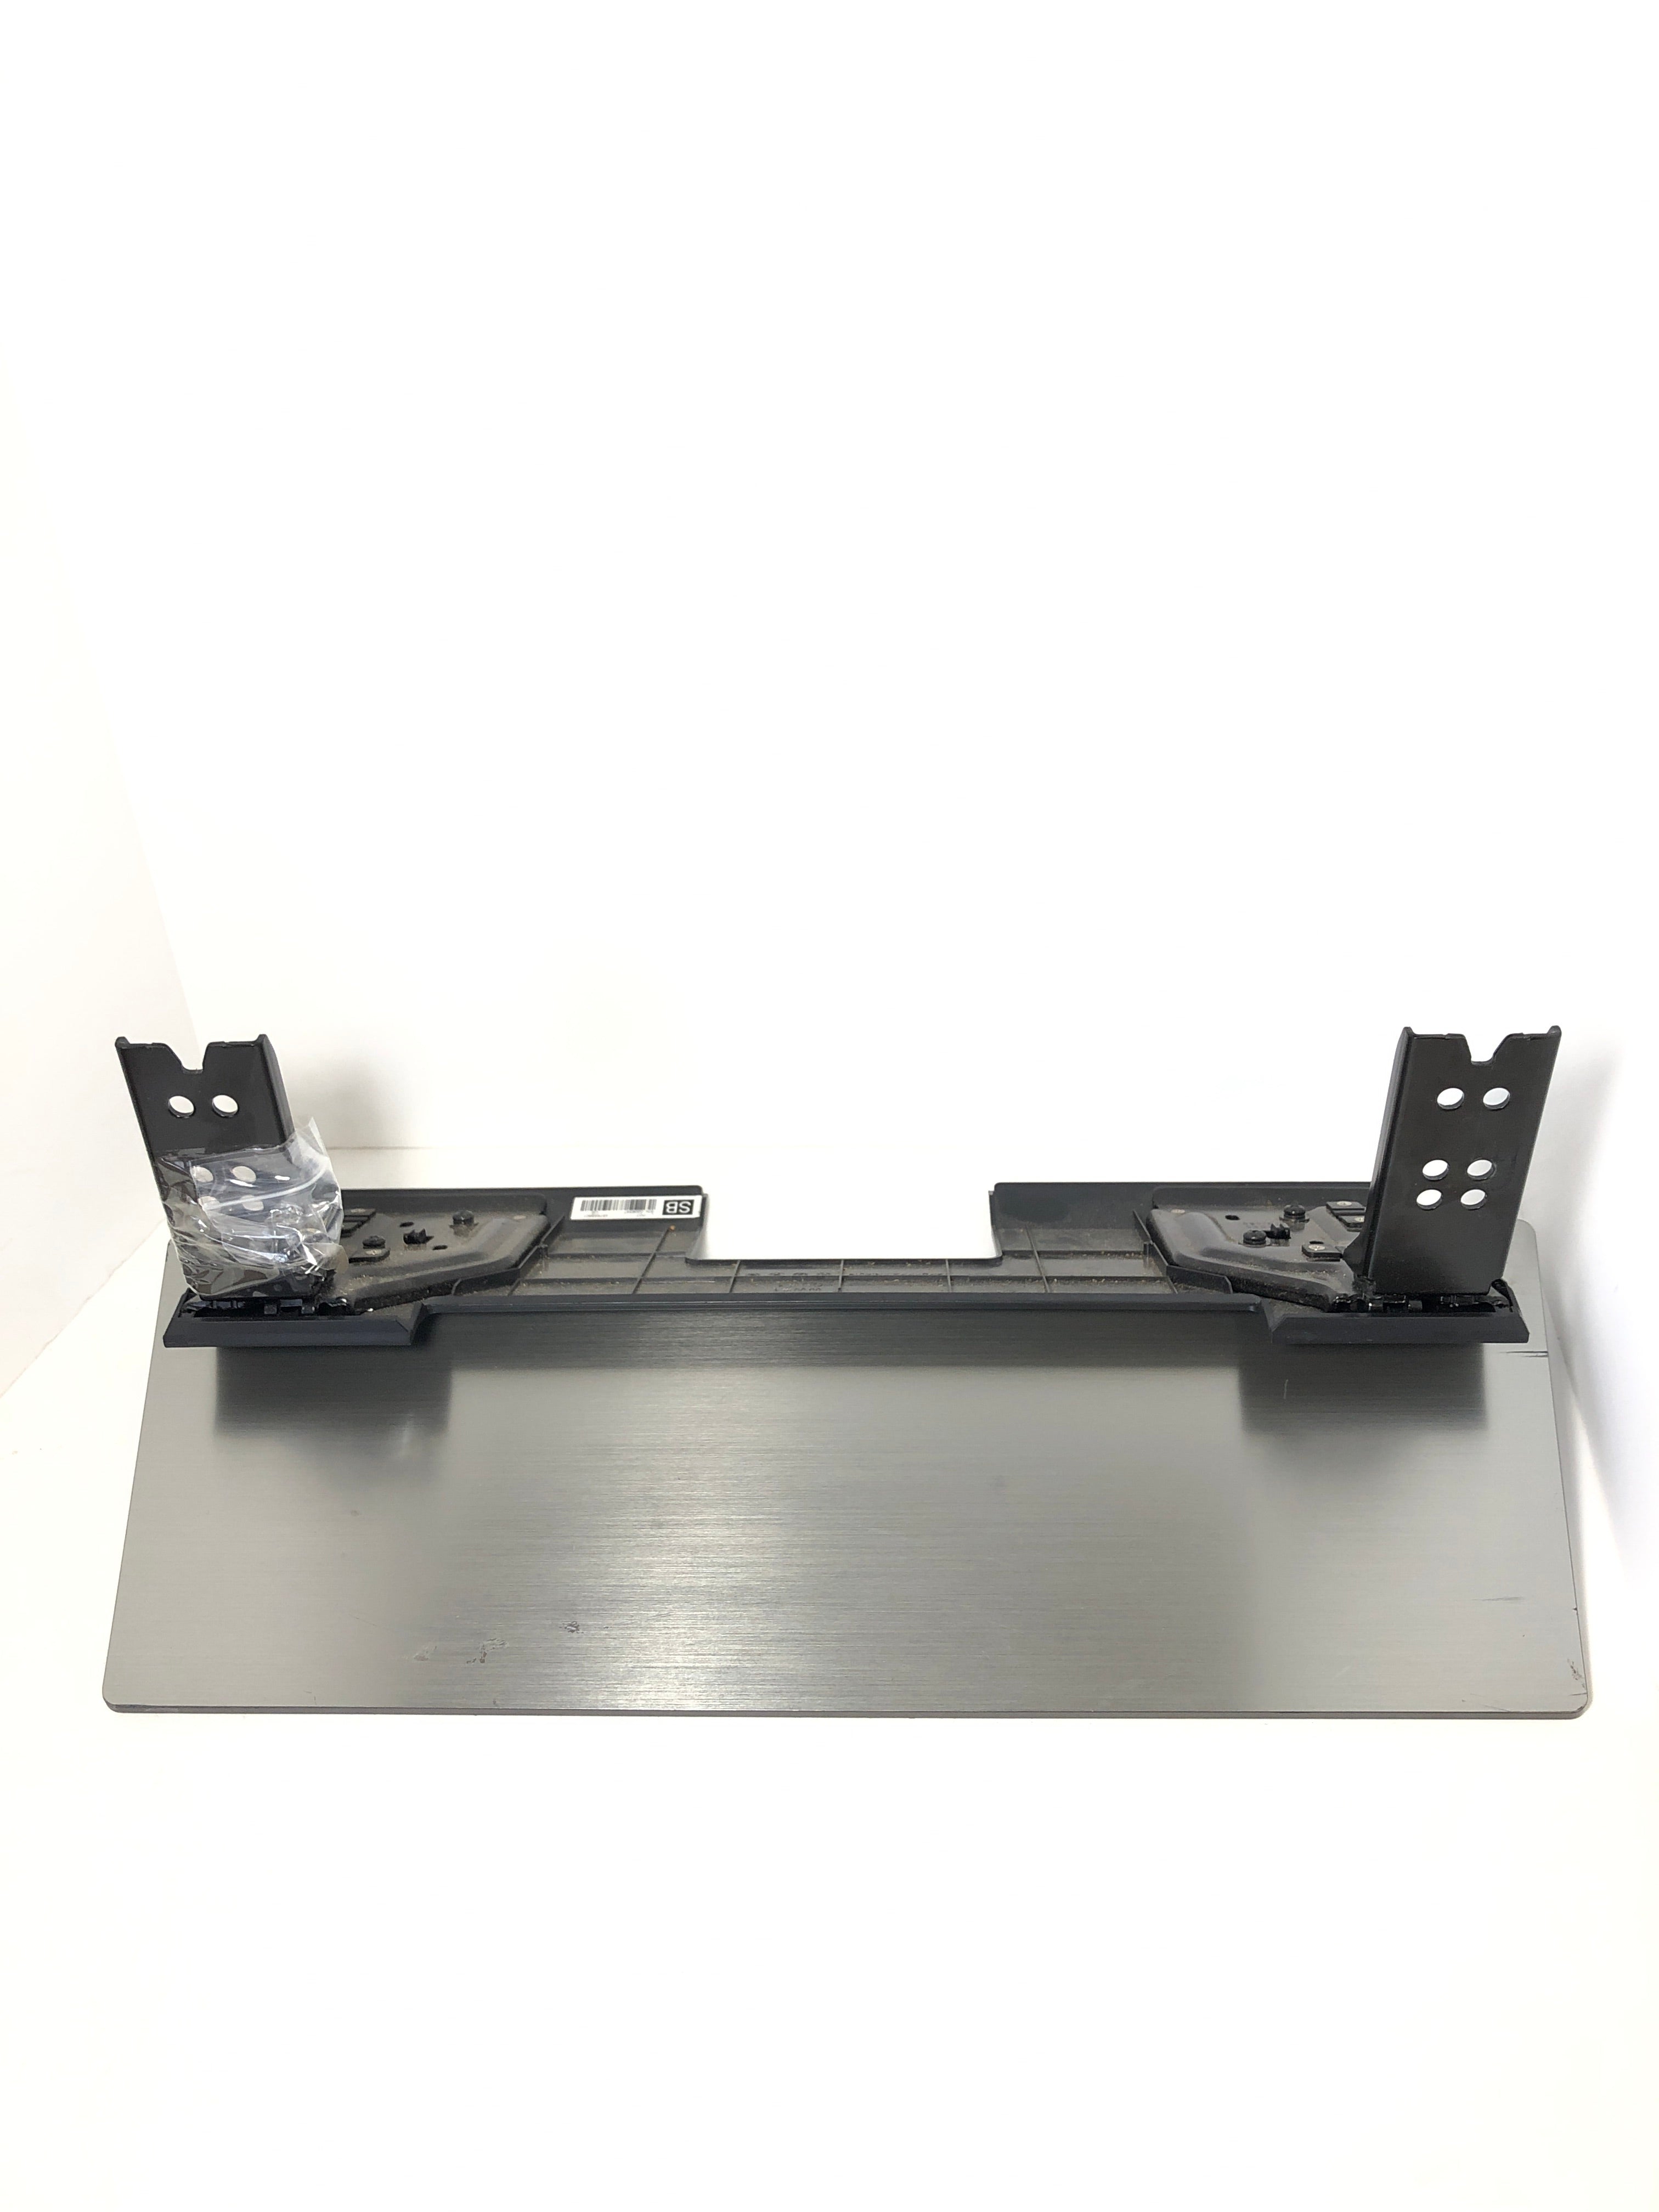 Sony XBR-55X850D TV Stand/Base